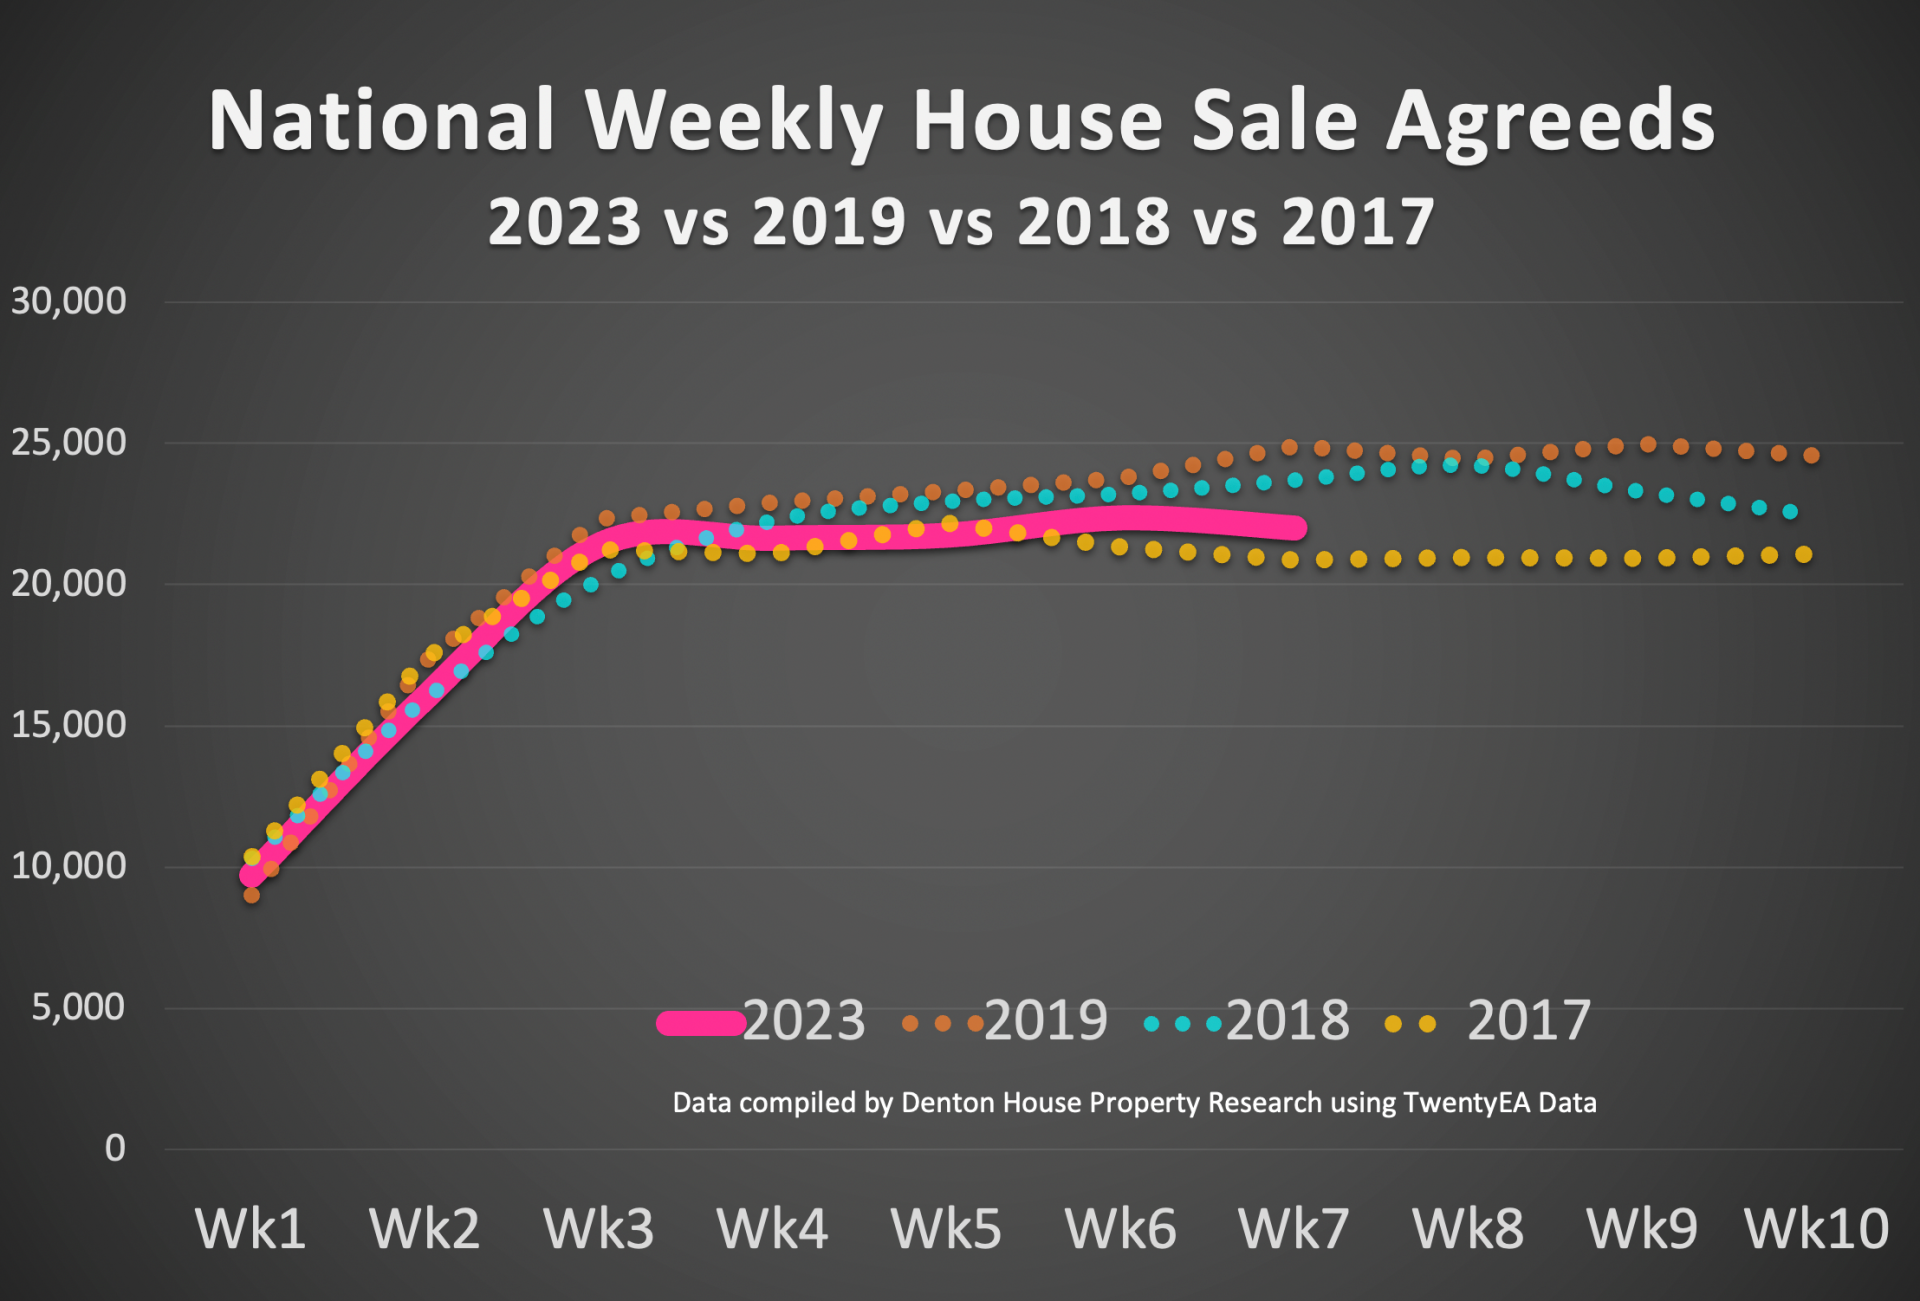 National Weekly House Sale Agreeds